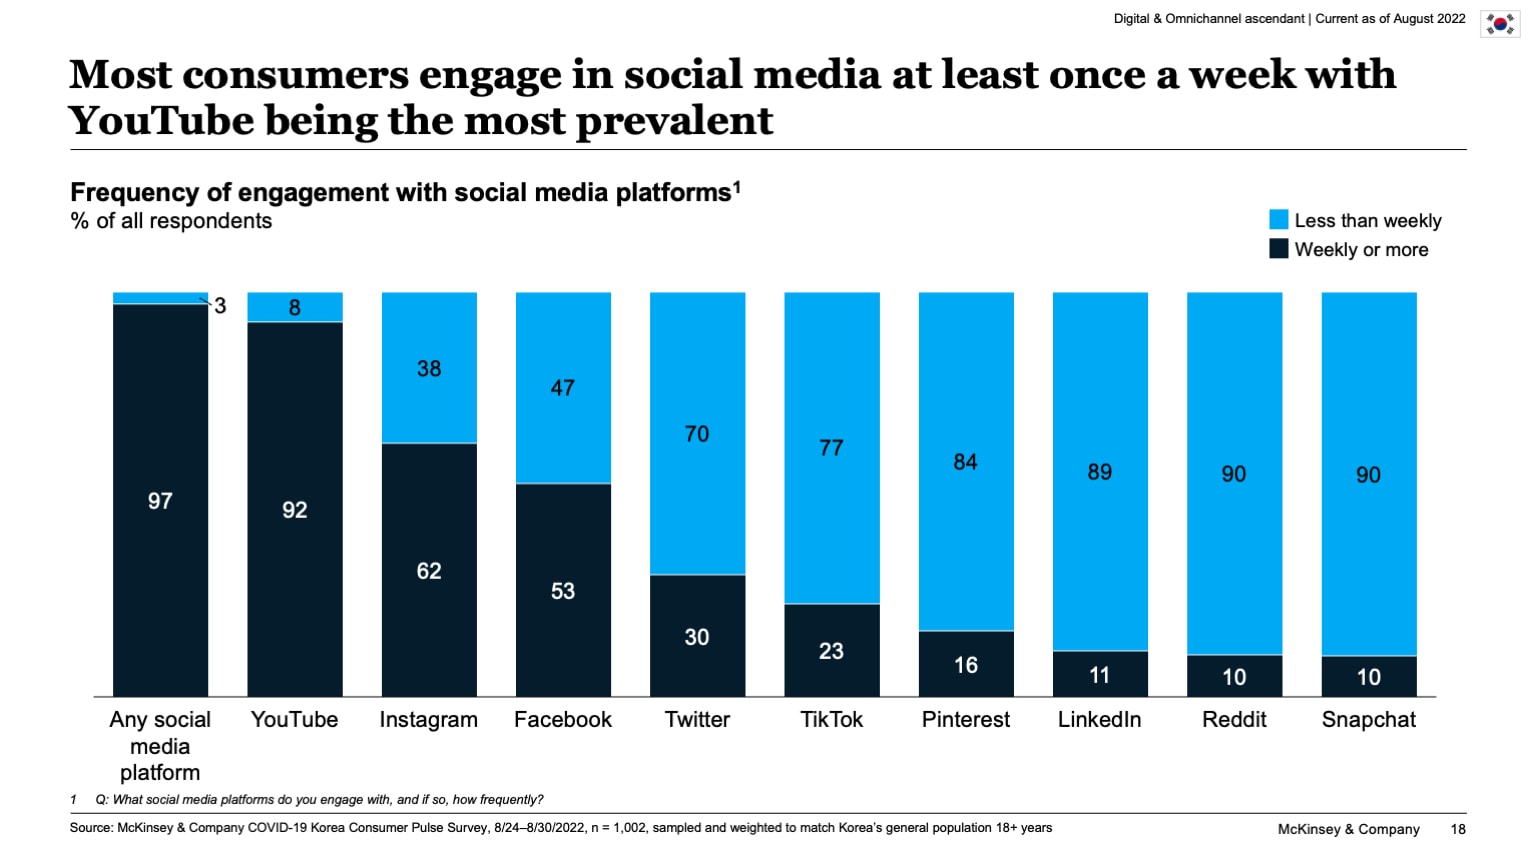 Most consumers engage in social media at least once a week with YouTube being the most prevalent